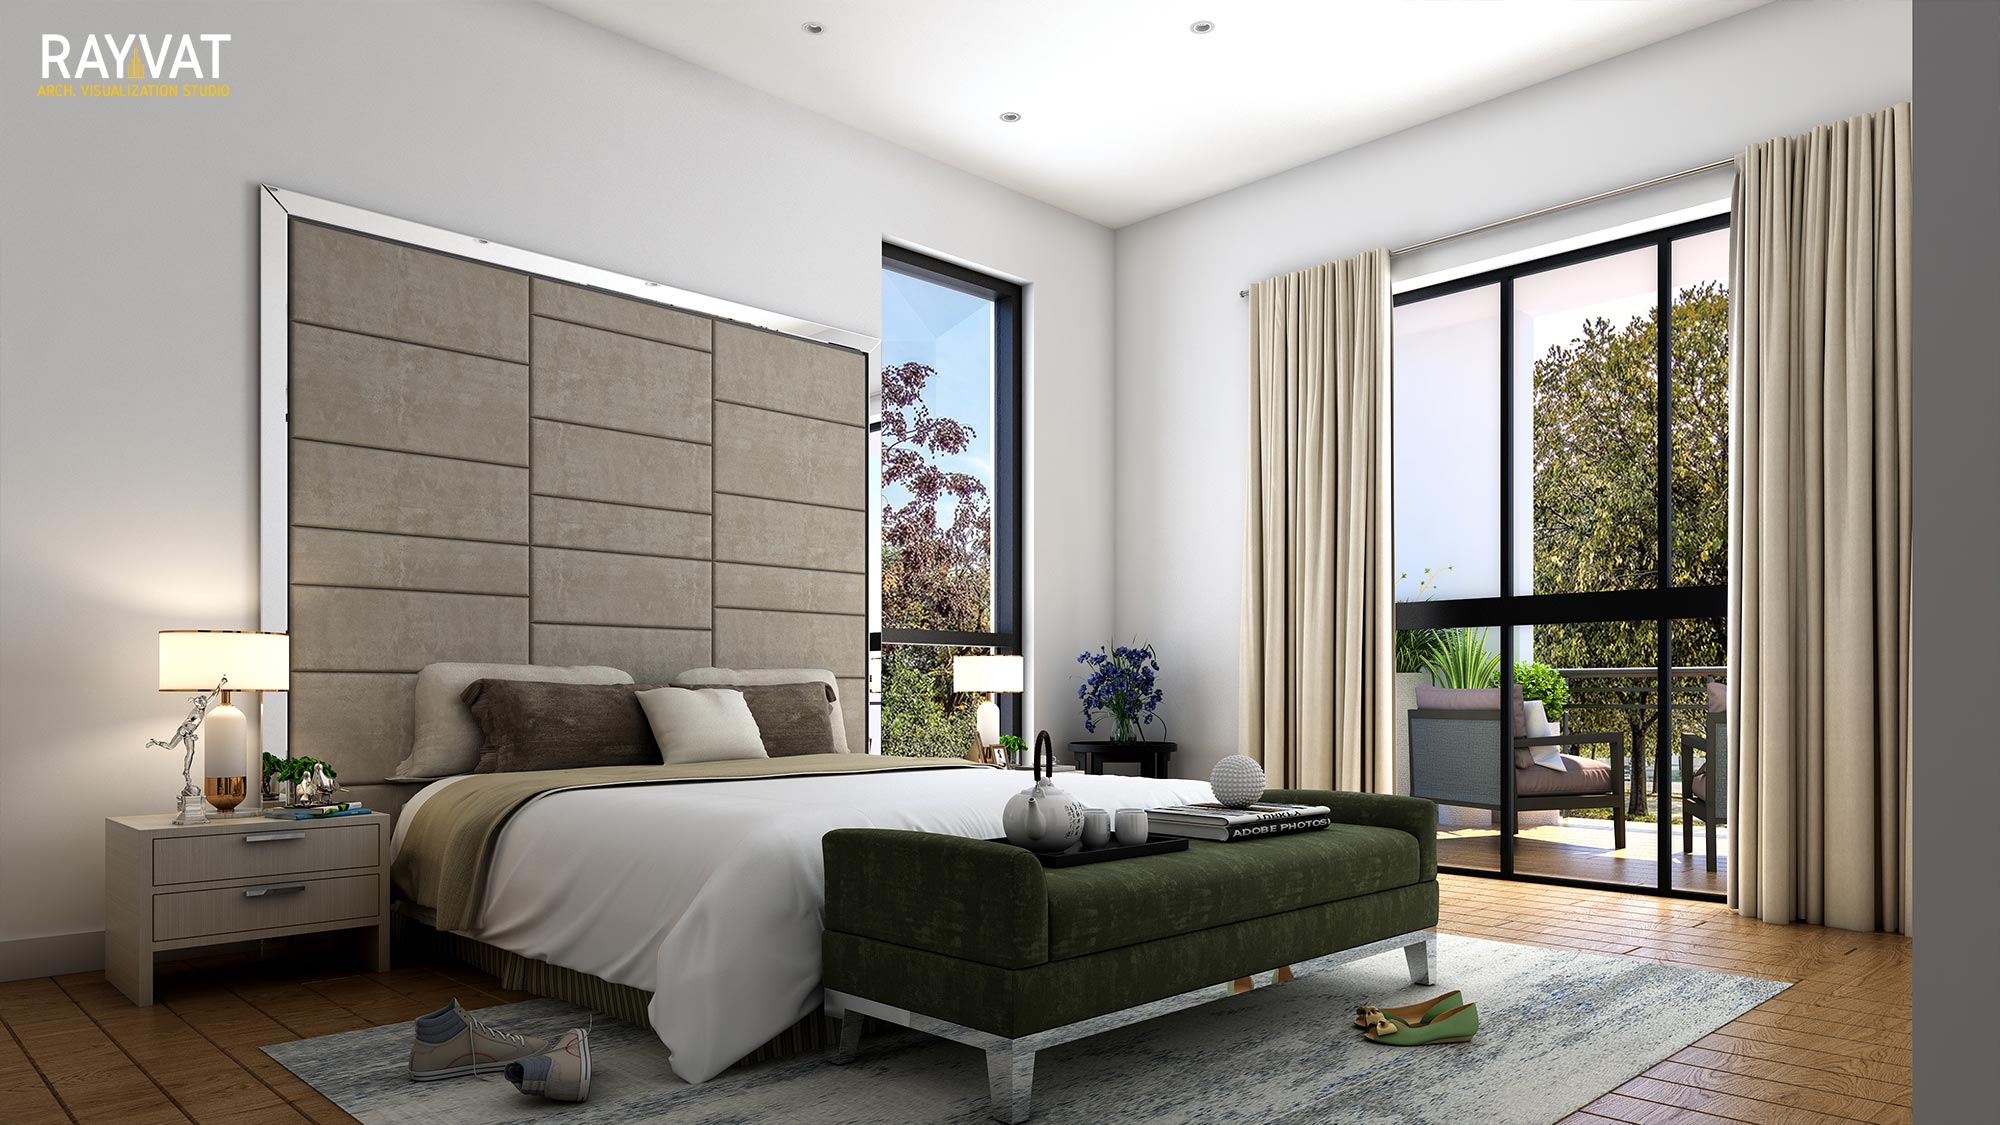 Bedroom CGI that perfectly conveys comfort and style